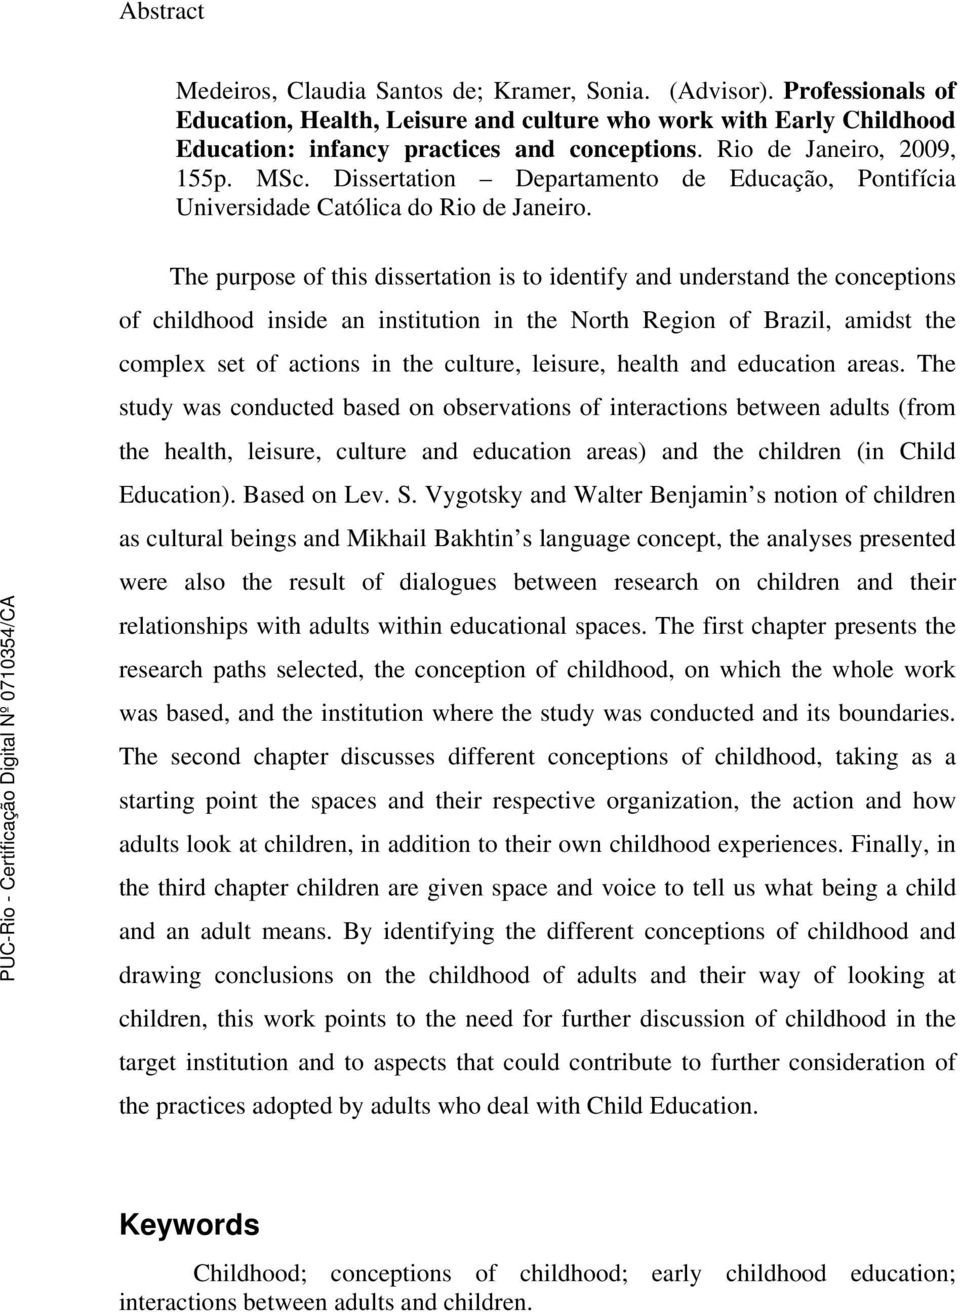 The purpose of this dissertation is to identify and understand the conceptions of childhood inside an institution in the North Region of Brazil, amidst the complex set of actions in the culture,